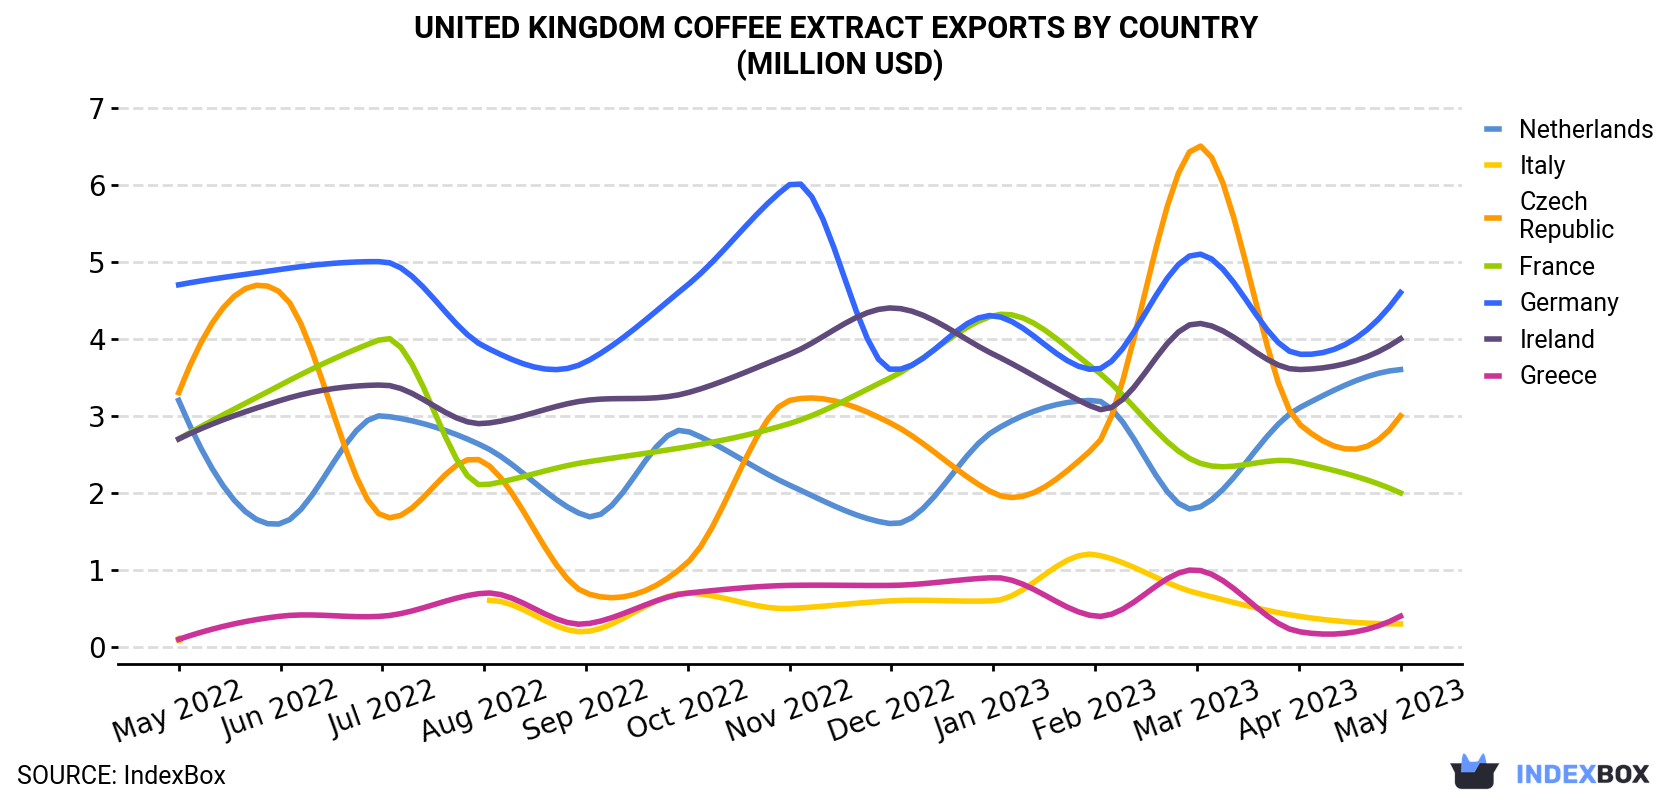 United Kingdom Coffee Extract Exports By Country (Million USD)